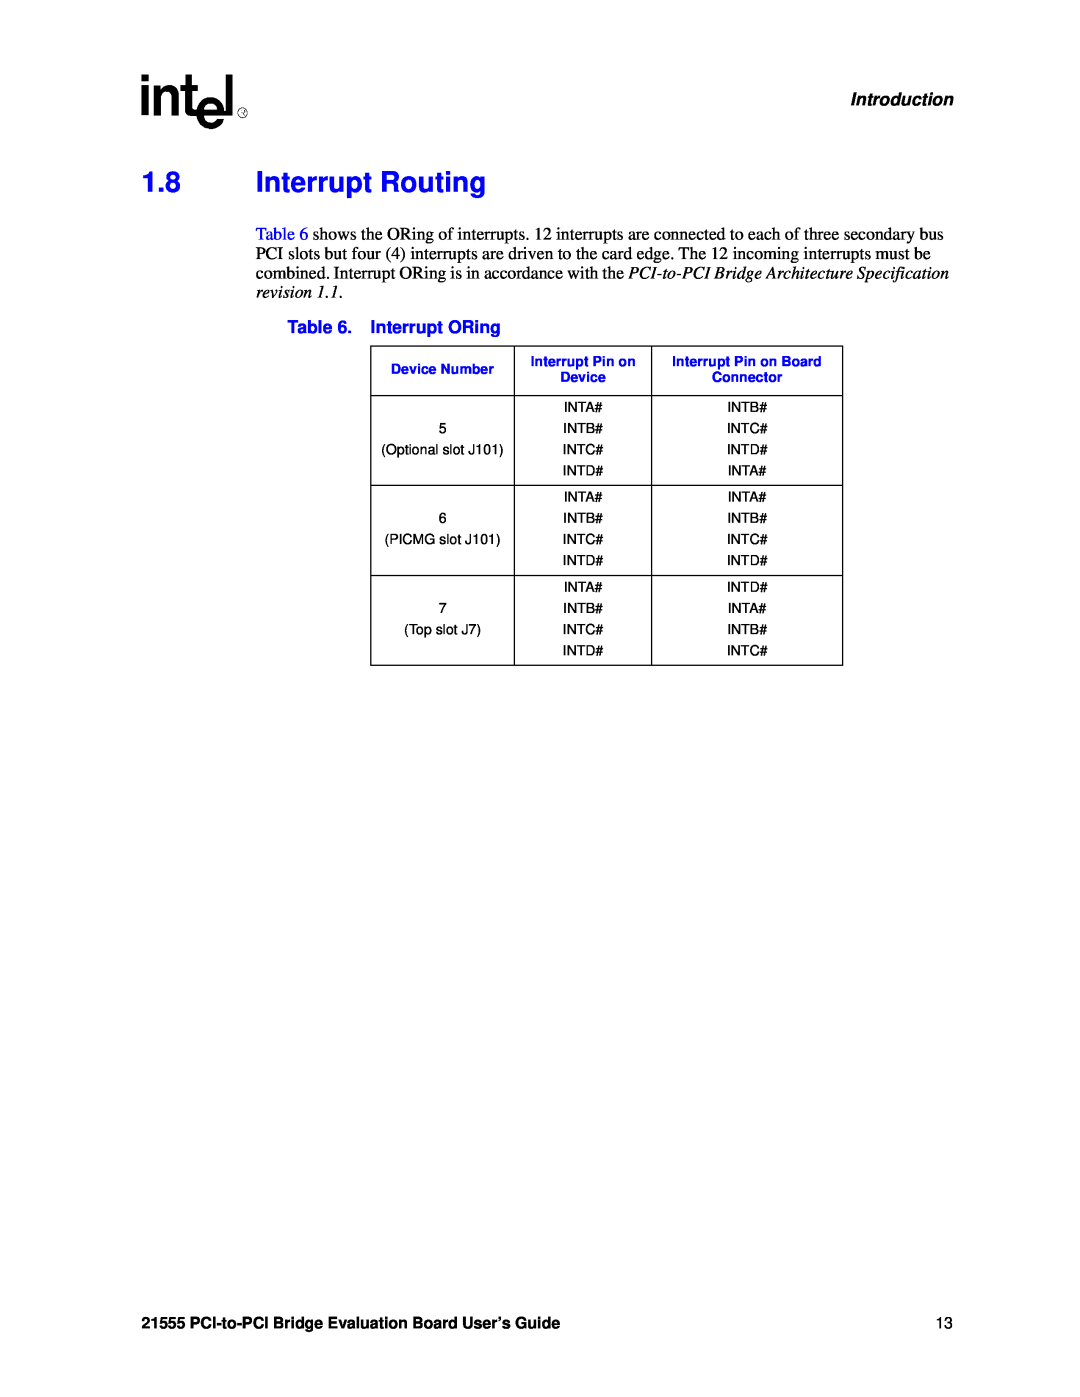 Intel 21555 manual Interrupt Routing, Introduction, Interrupt ORing 